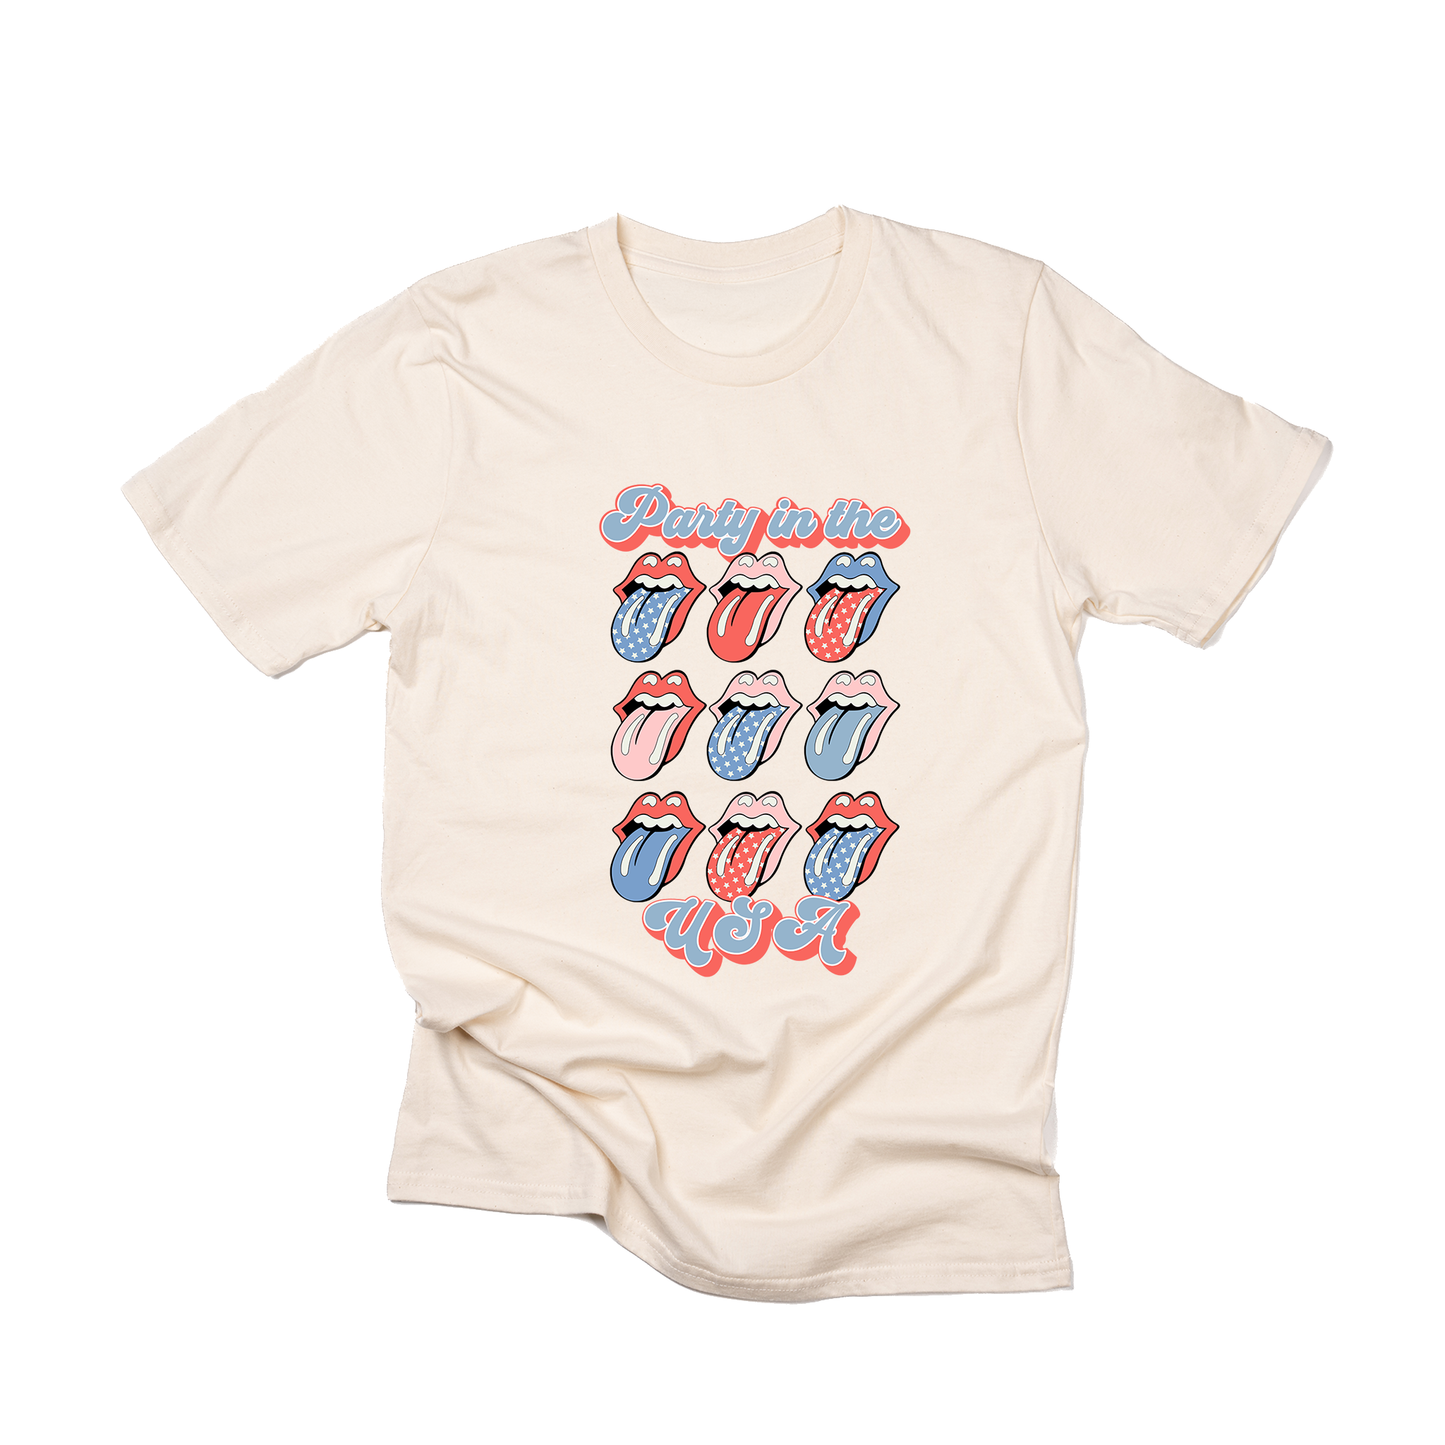 Party in the USA - Tee (Natural)